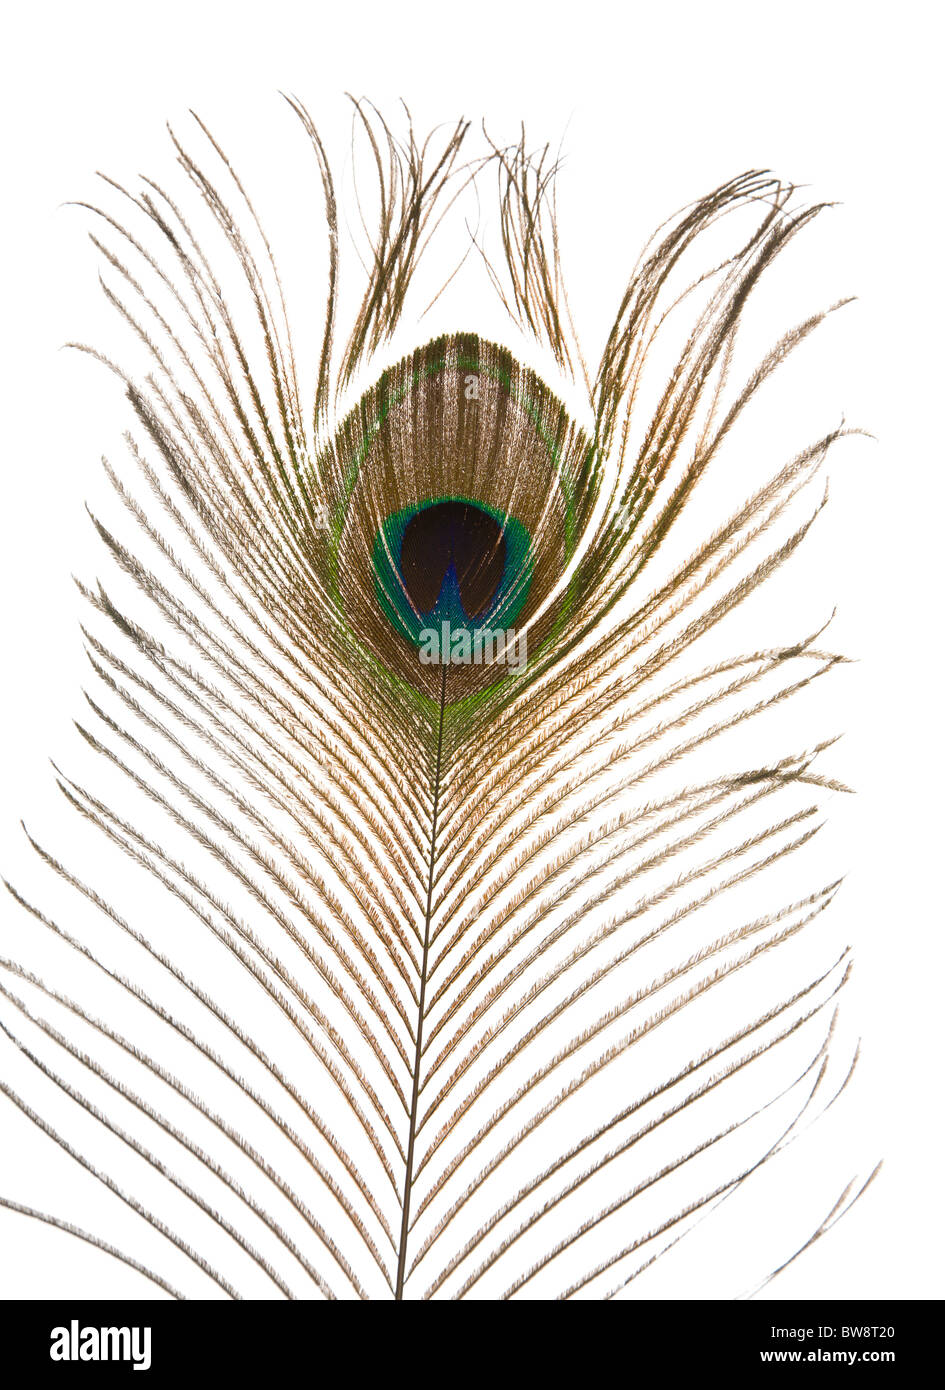 single peacock feather isolated on white background; Stock Photo